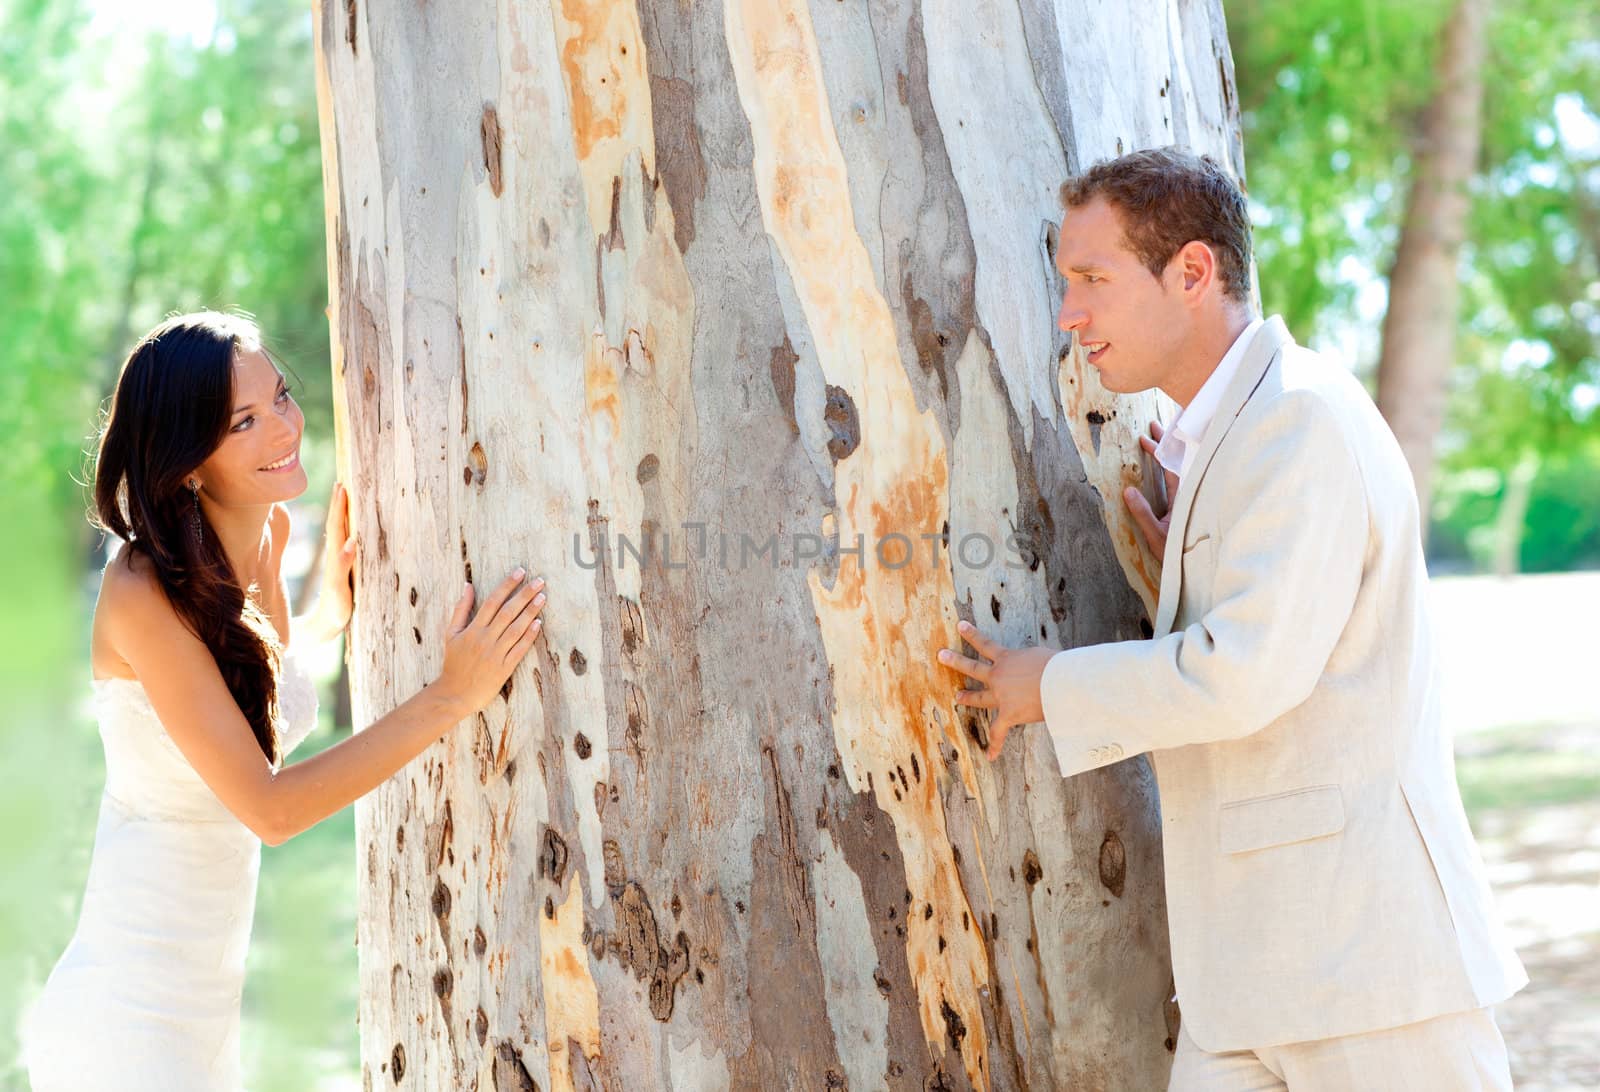 Couple happy in love playing in a tree trunk outdoor park